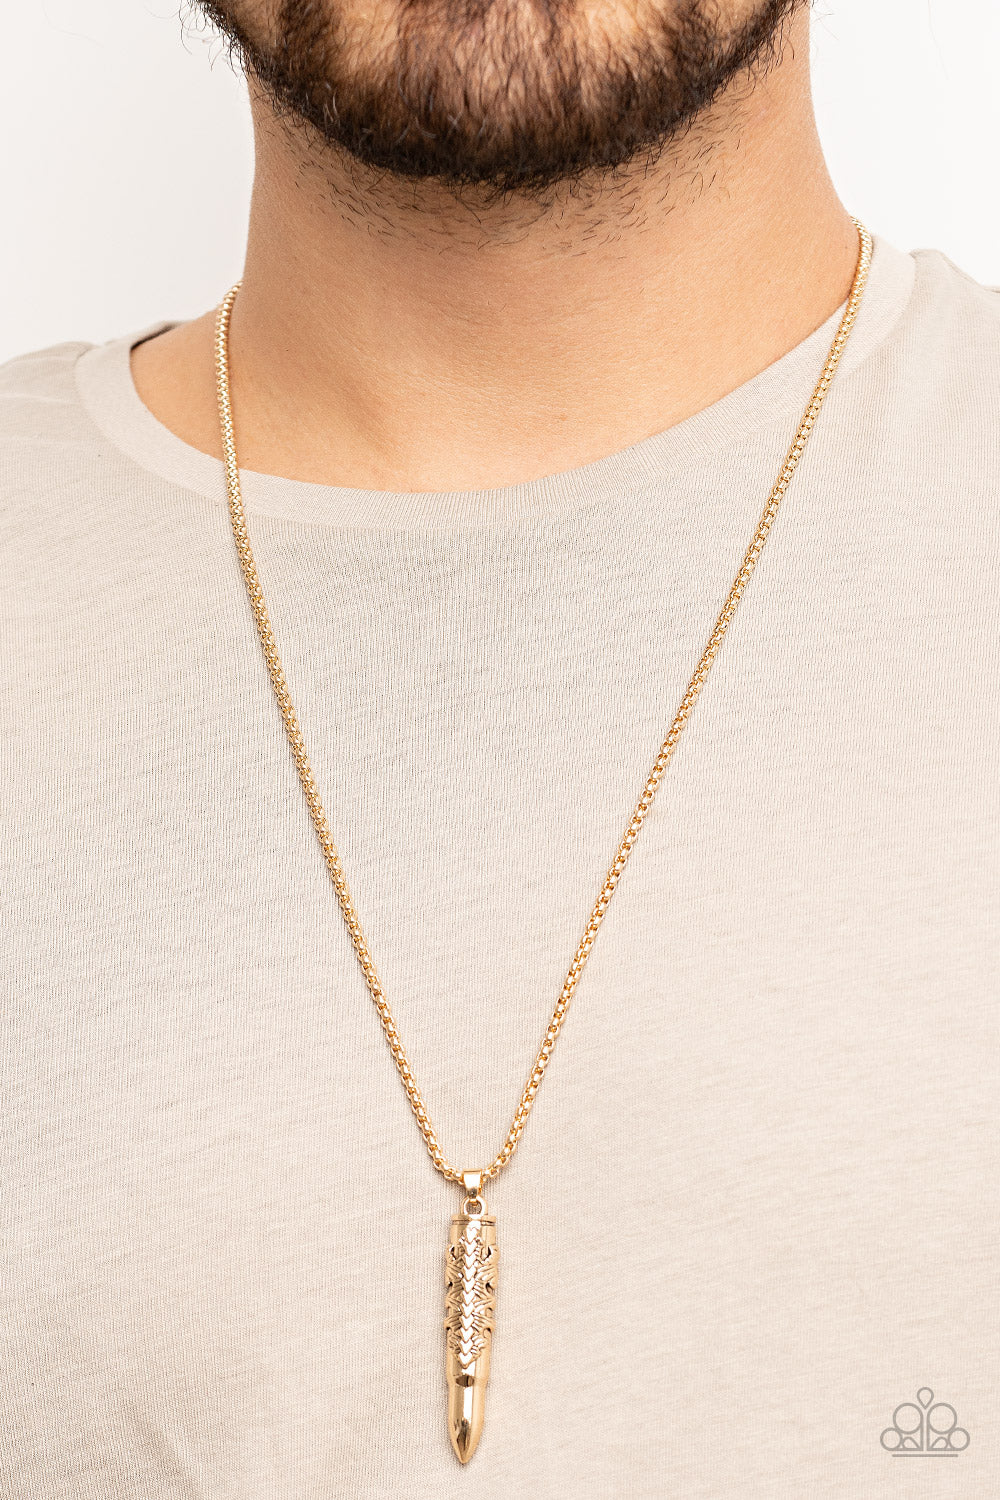 Mysterious Marksman Gold Urban Necklace